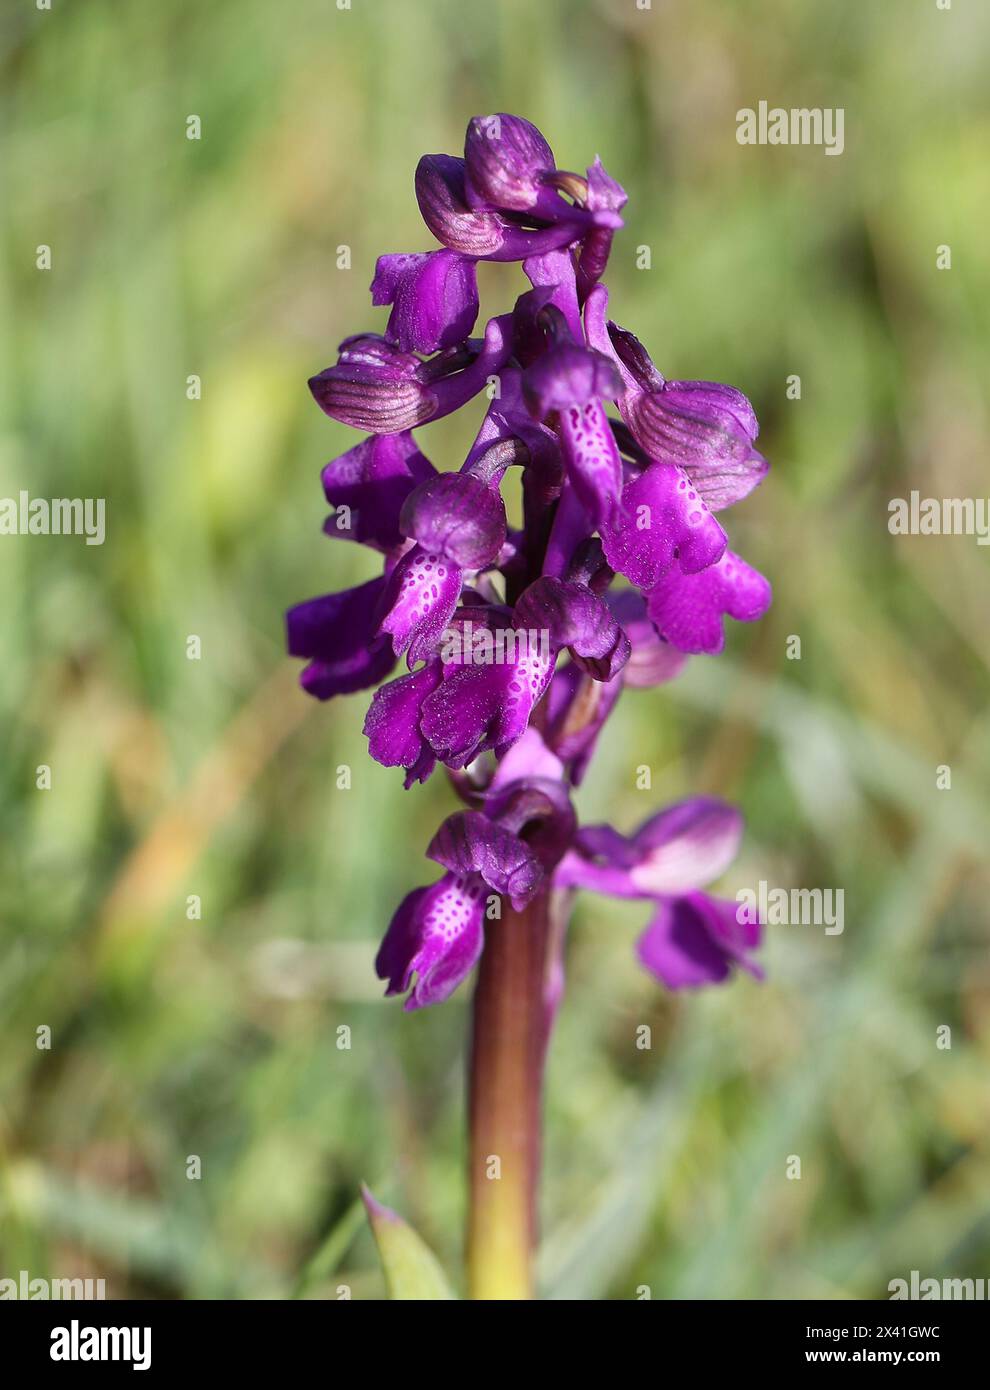 Green-winged Orchid or Green-veined Orchid, Anacamptis morio (Orchis morio), Orchidaceae. Bernwood Meadows, Oxfordshire, UK. .Typical Purple Flower. Stock Photo